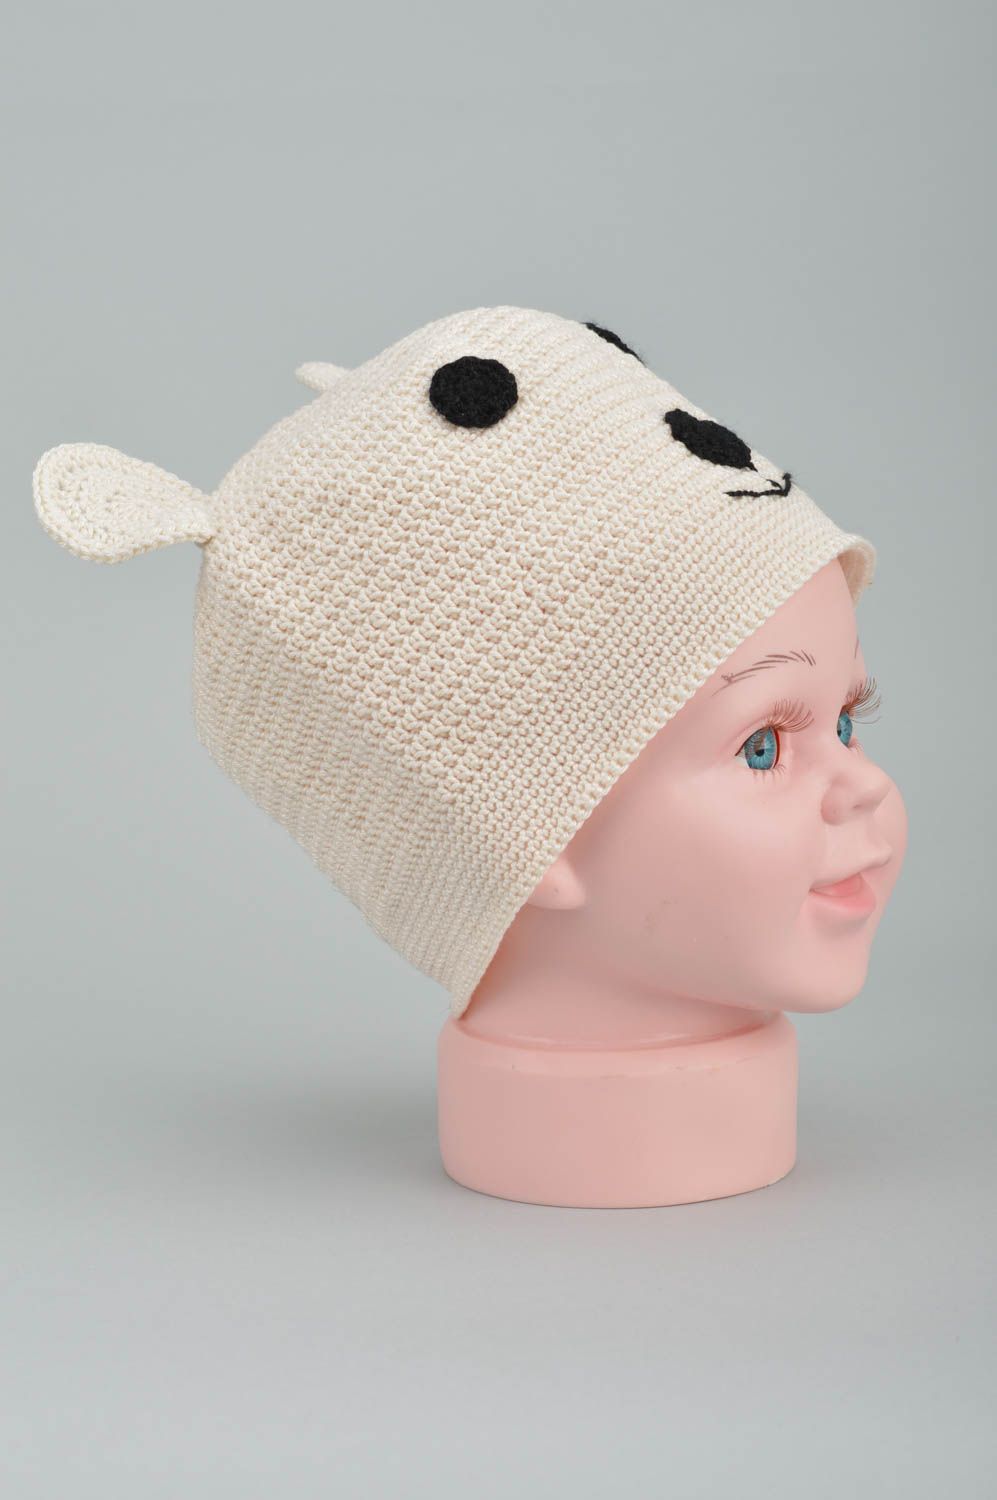 Handmade woven cap for kids in shape of bear with ears for boys and girls photo 5